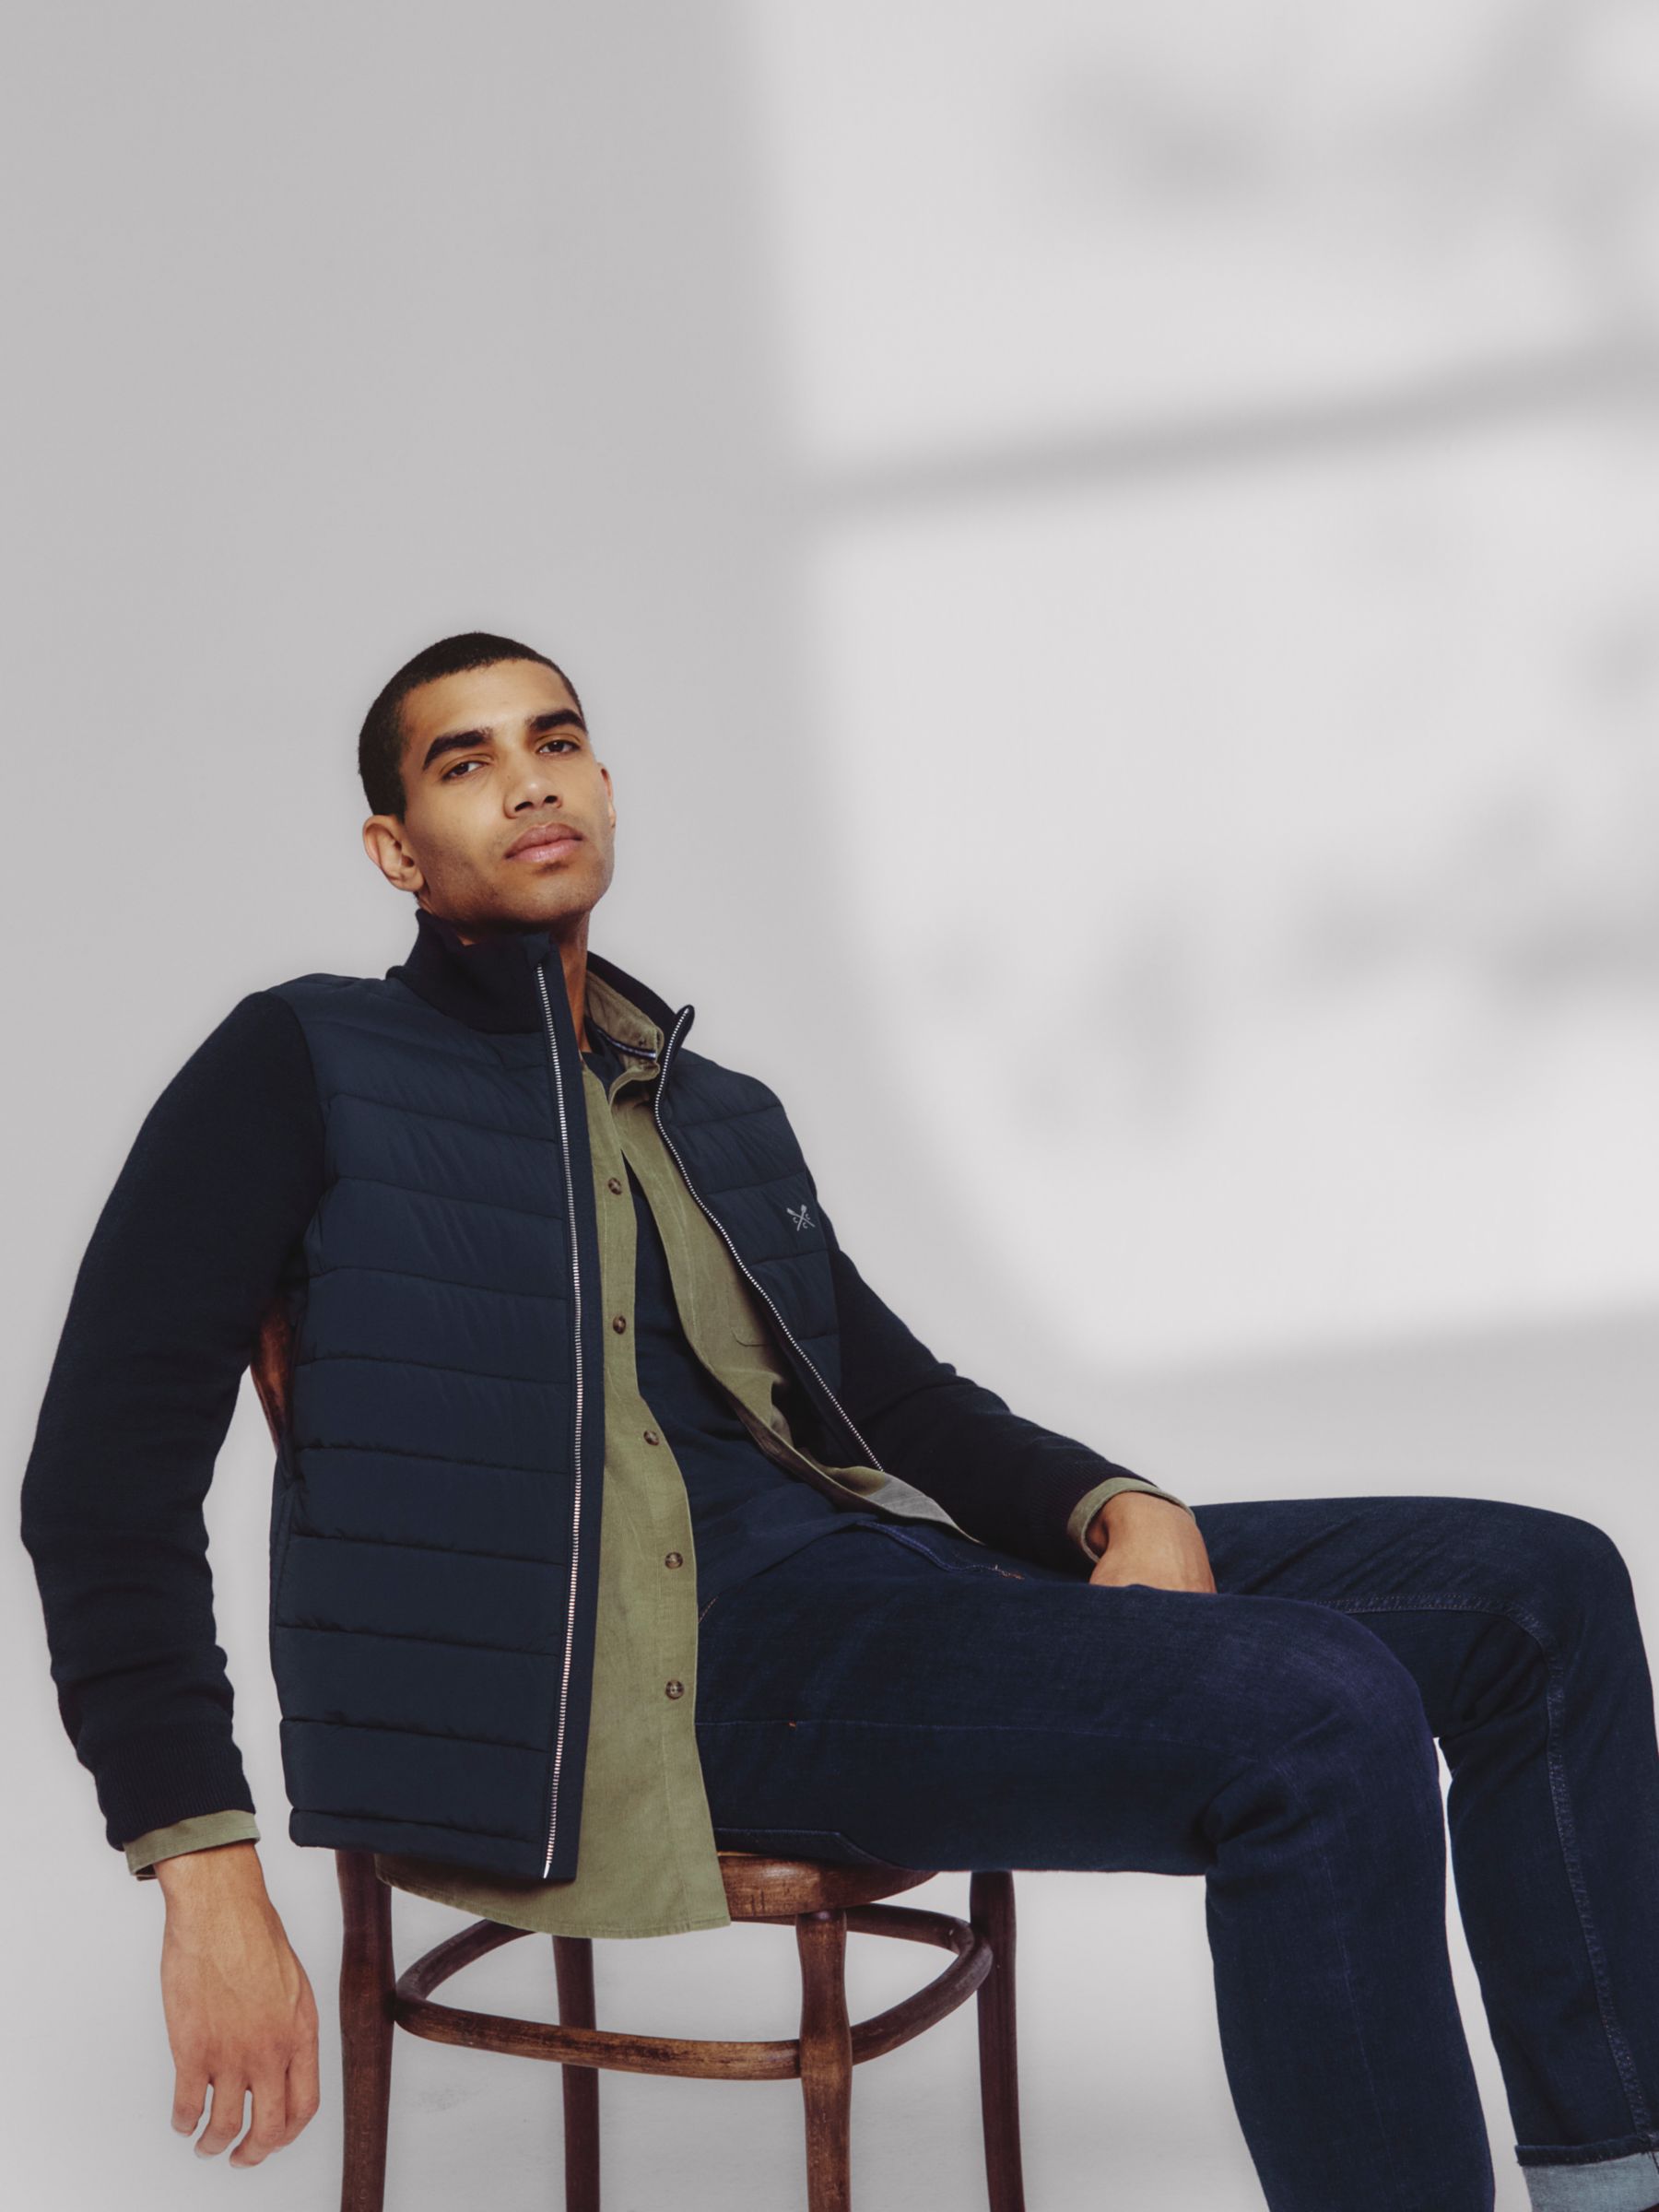 Buy Crew Clothing Dartmouth Wool Blend Hybrid Quilted Jacket Online at johnlewis.com